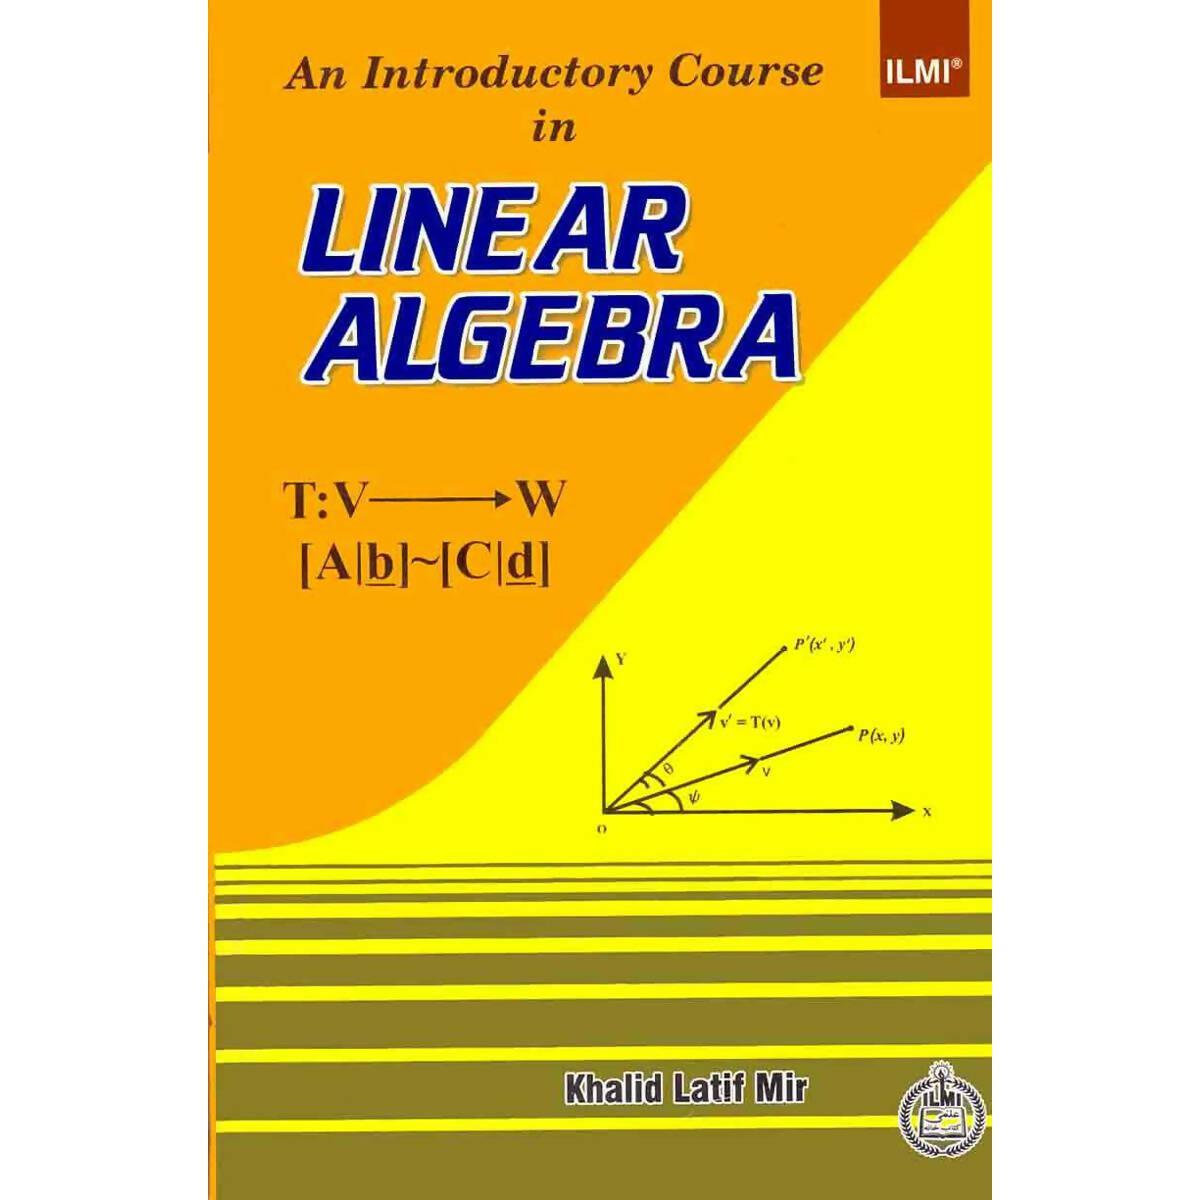 An Introductory Course In Linear Algebra Book By Khalid Latif Mir - ValueBox